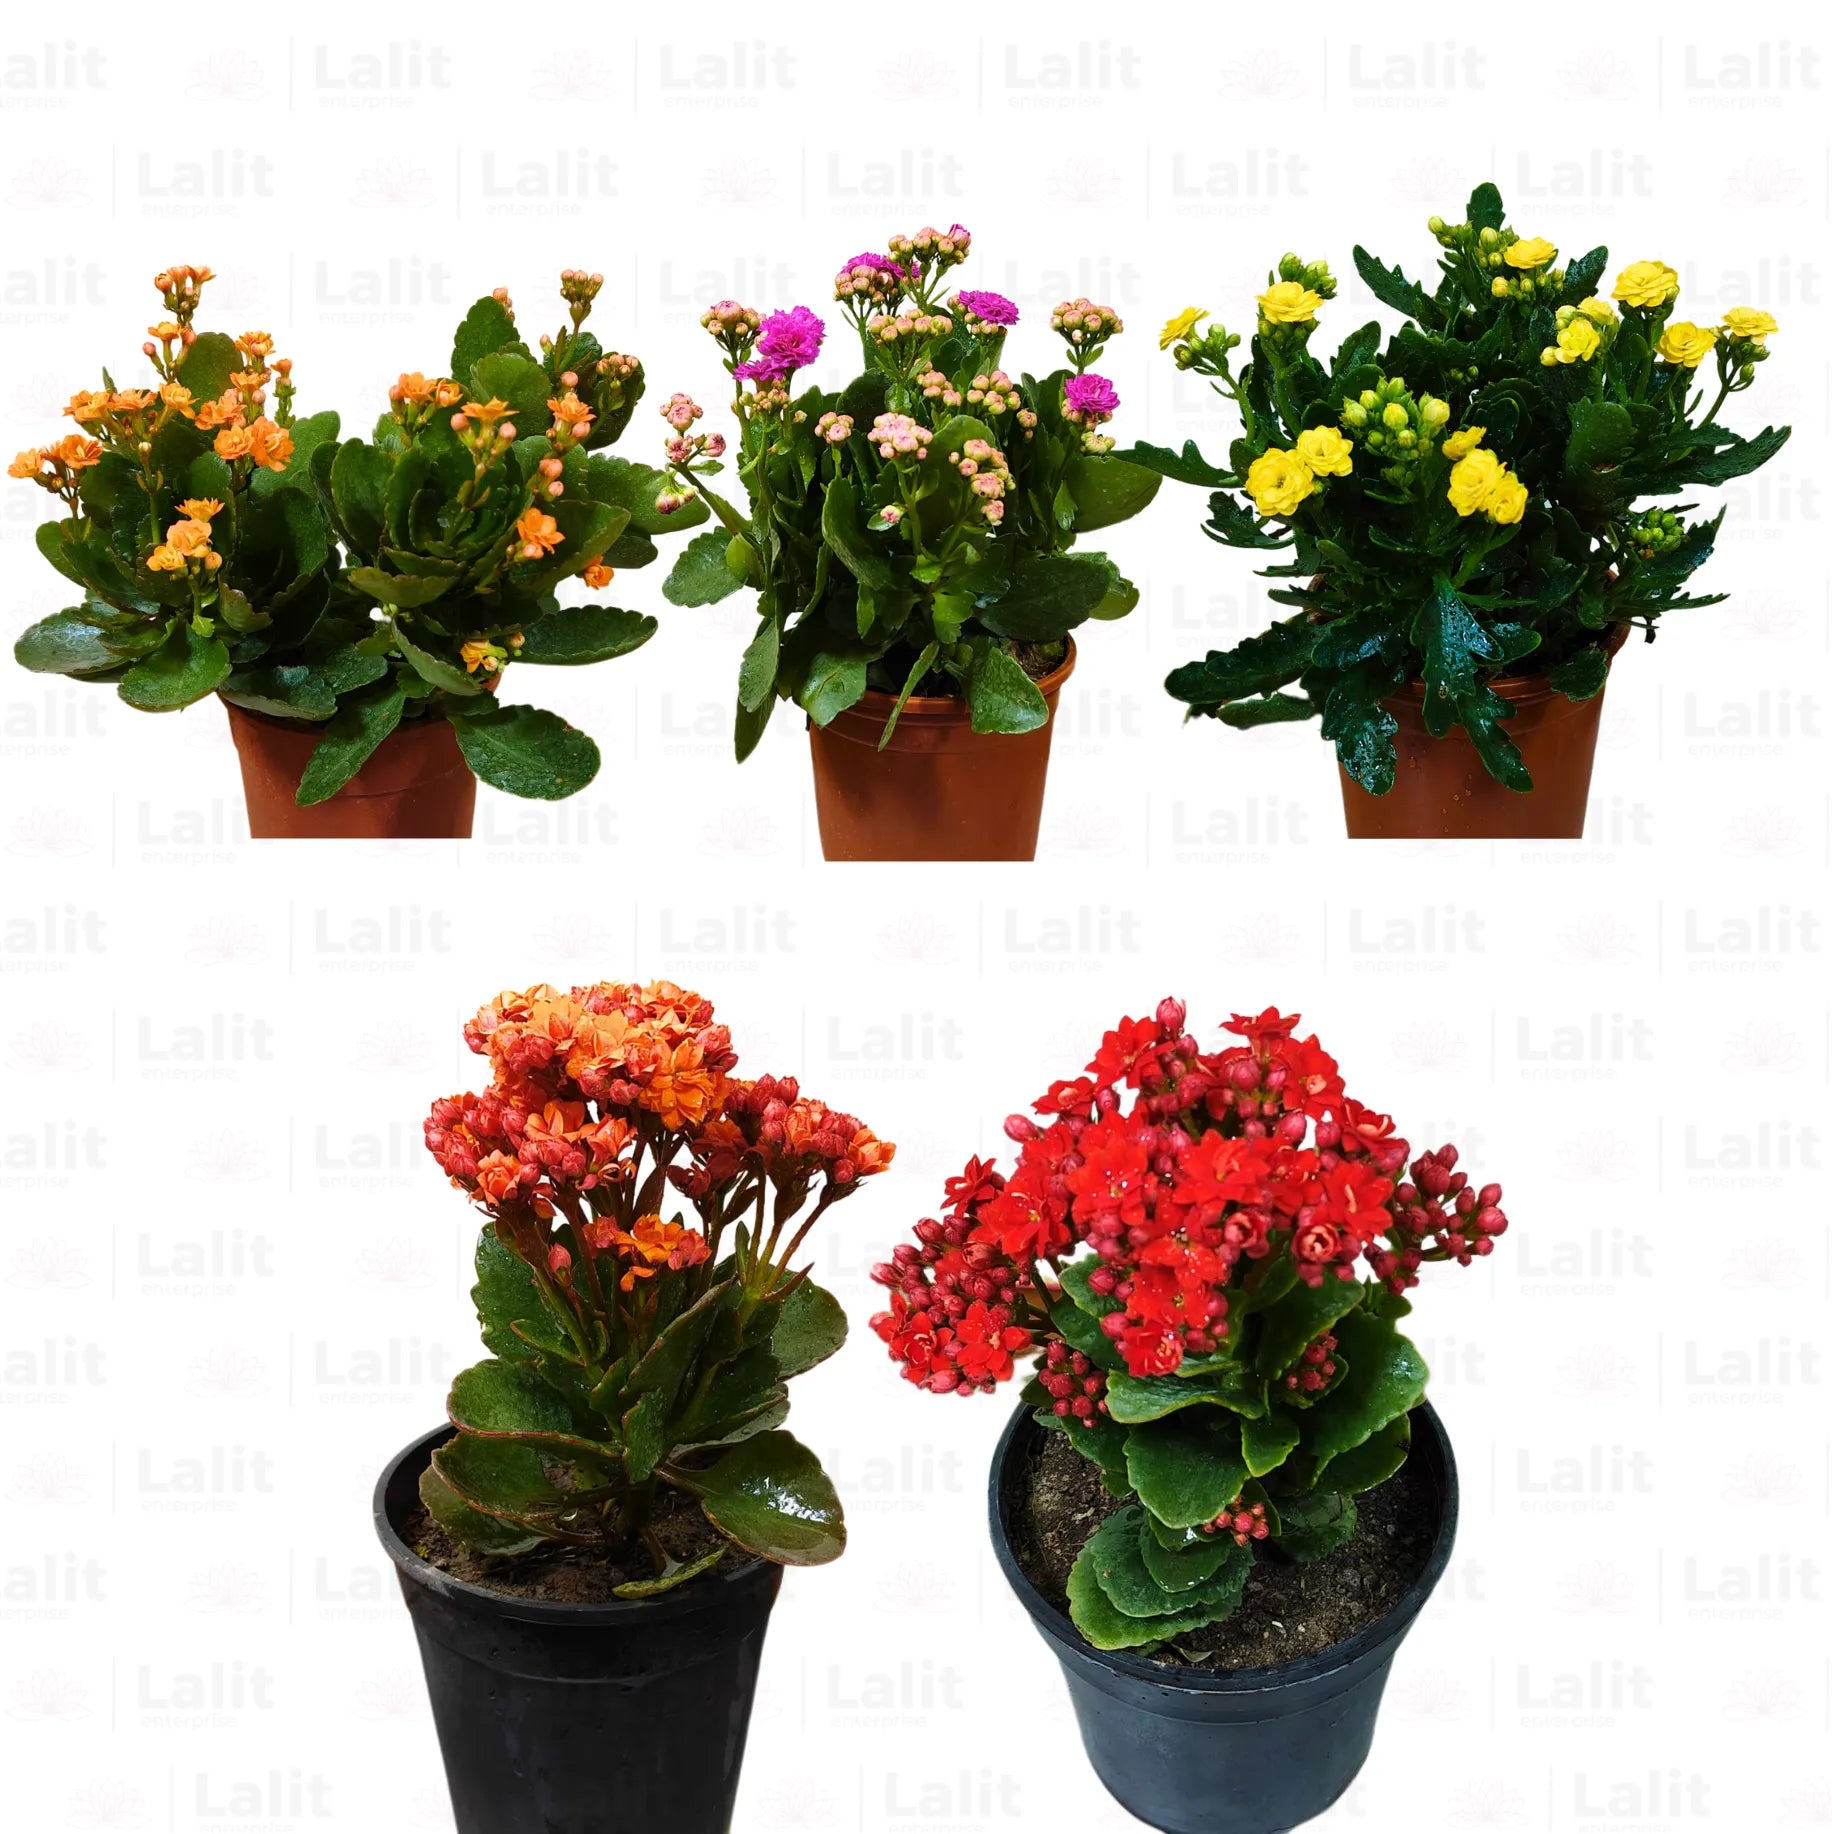 Buy Kalanchoe (Flaming Katy) "Widow's-thrill" - Plant Online at Lalitenterprise